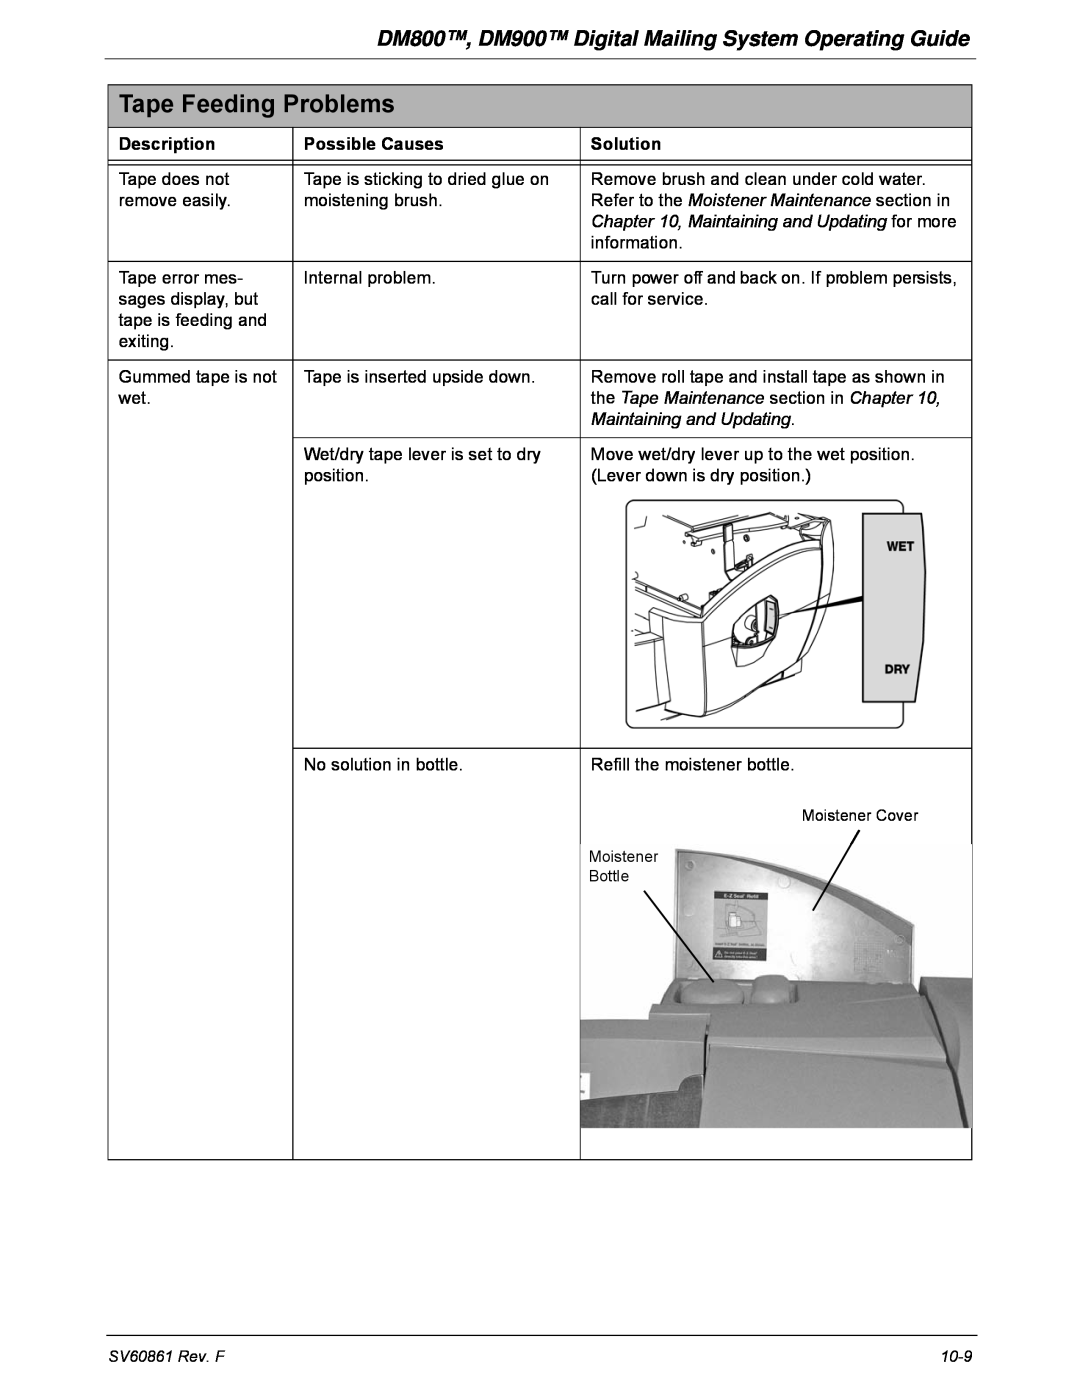 Pitney Bowes Tape Feeding Problems, DM800, DM900 Digital Mailing System Operating Guide, Description, Possible Causes 